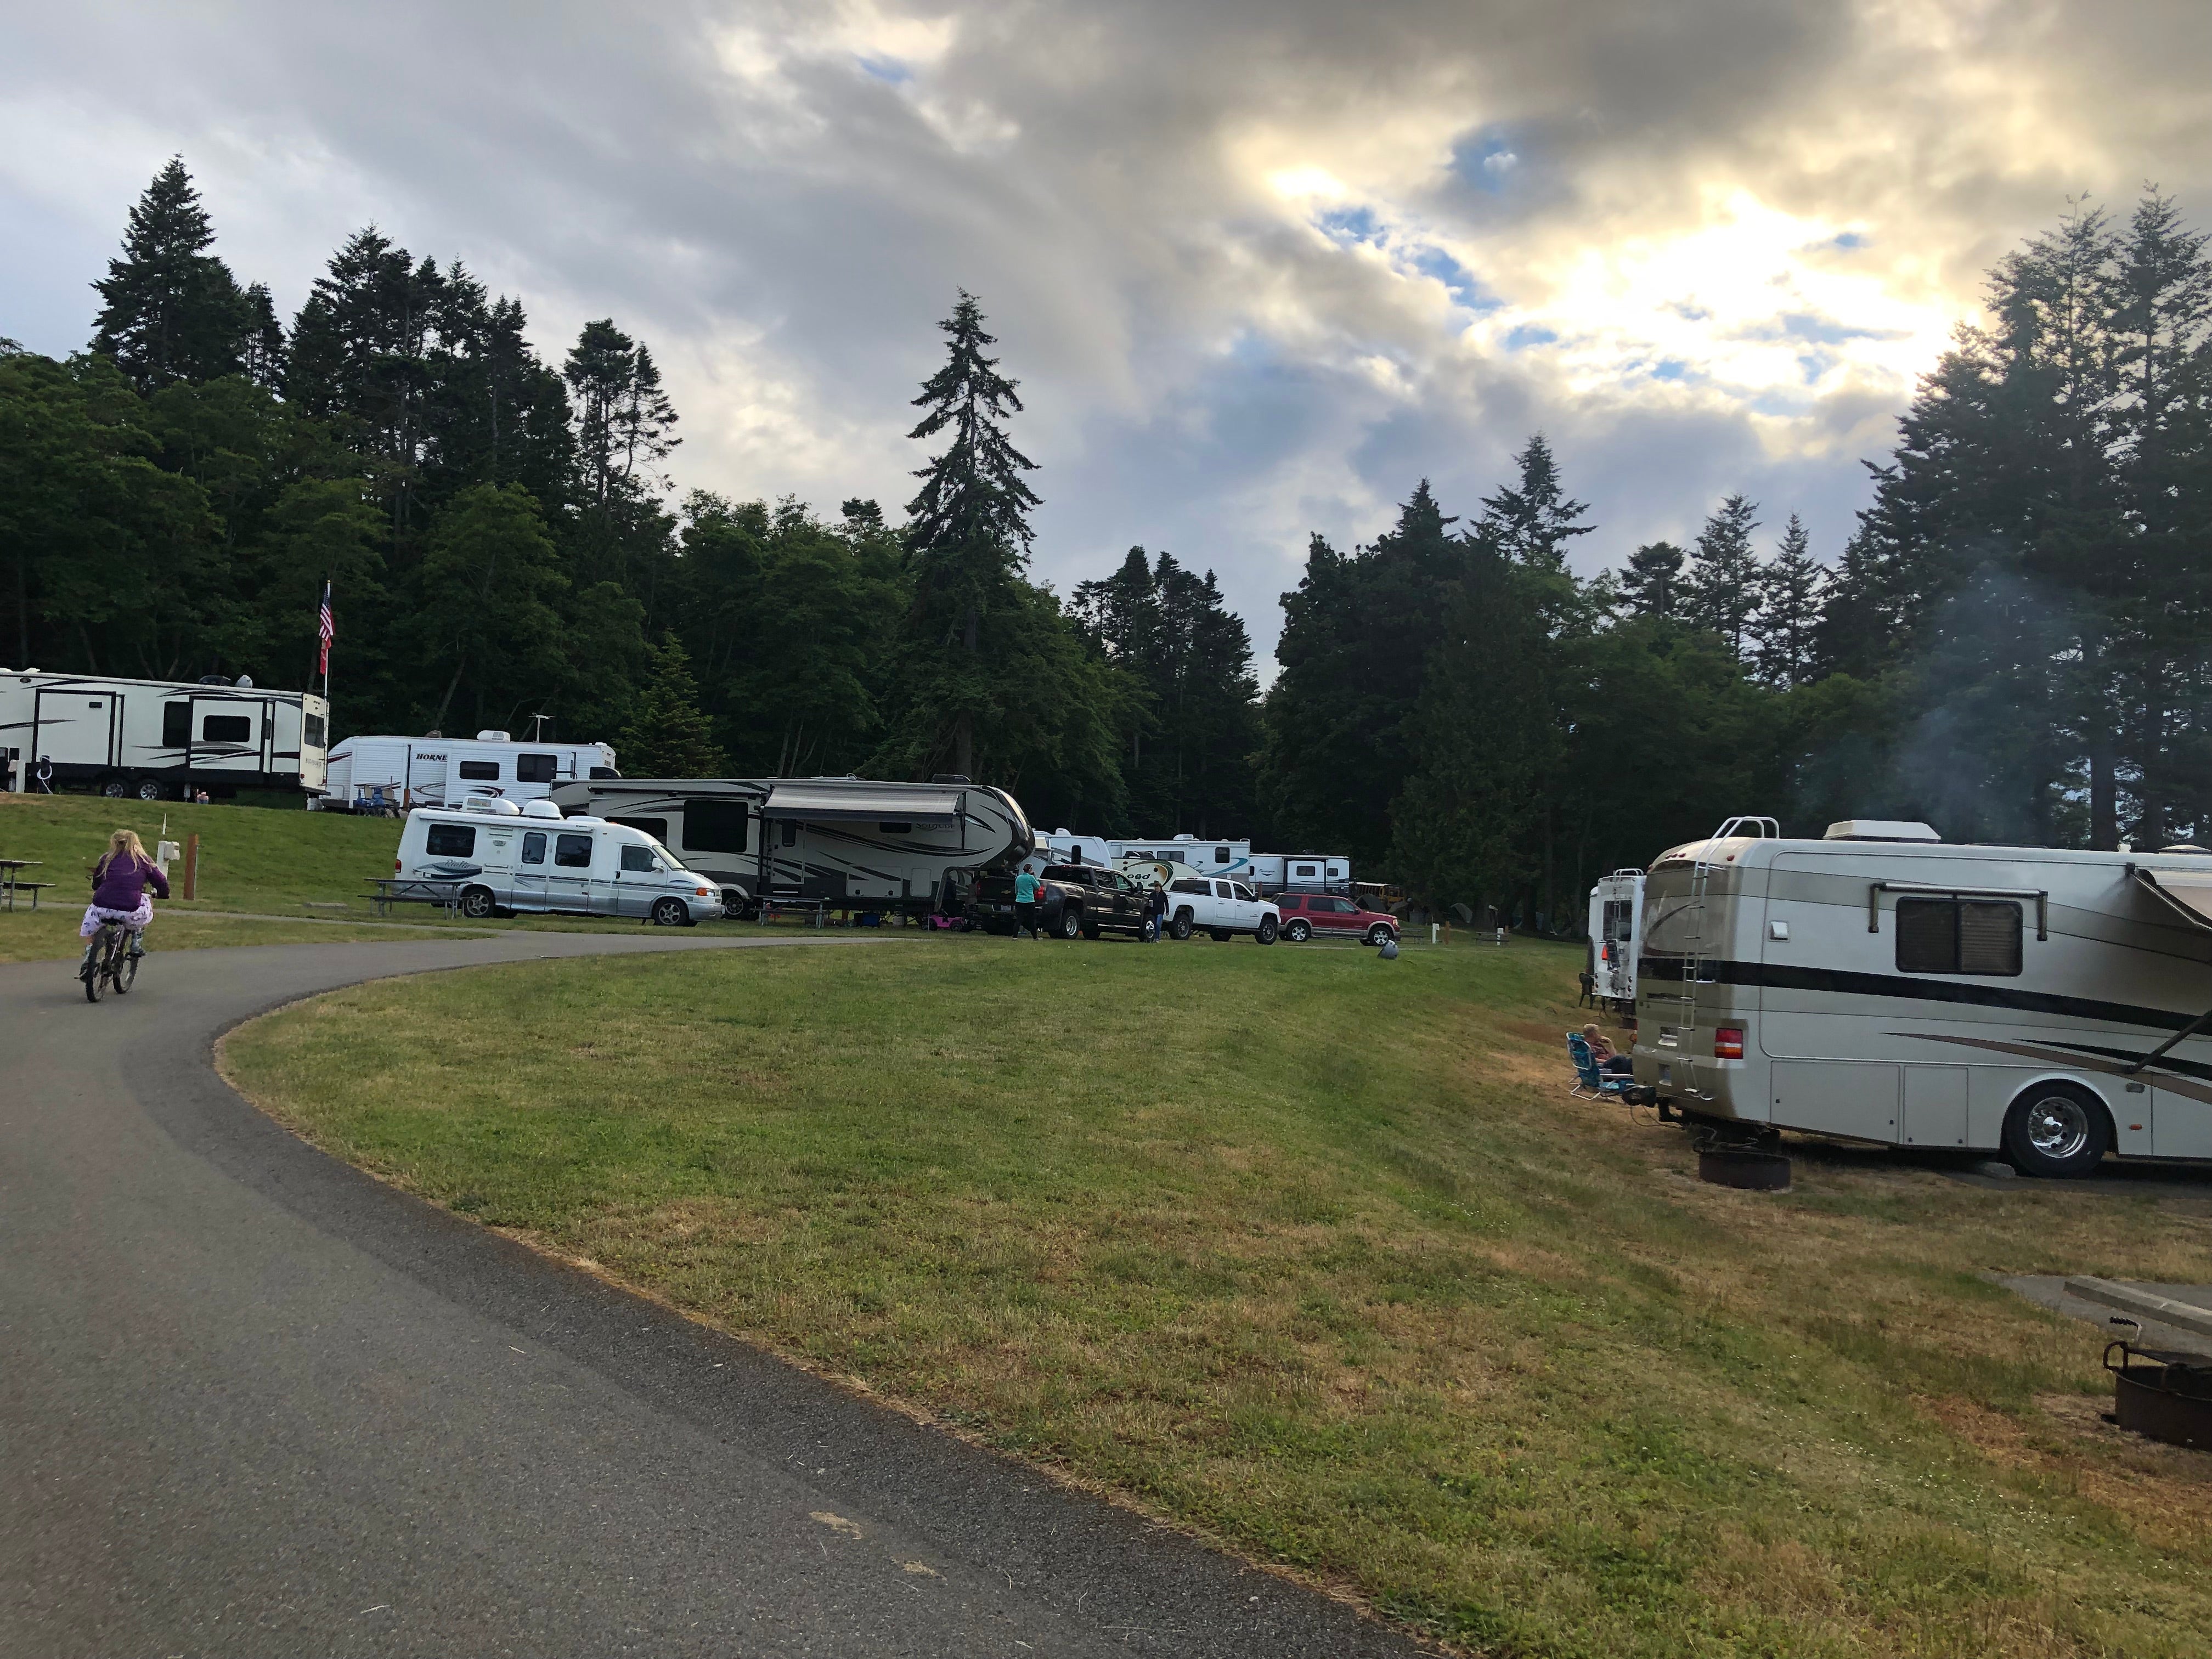 Another view of the RV sites